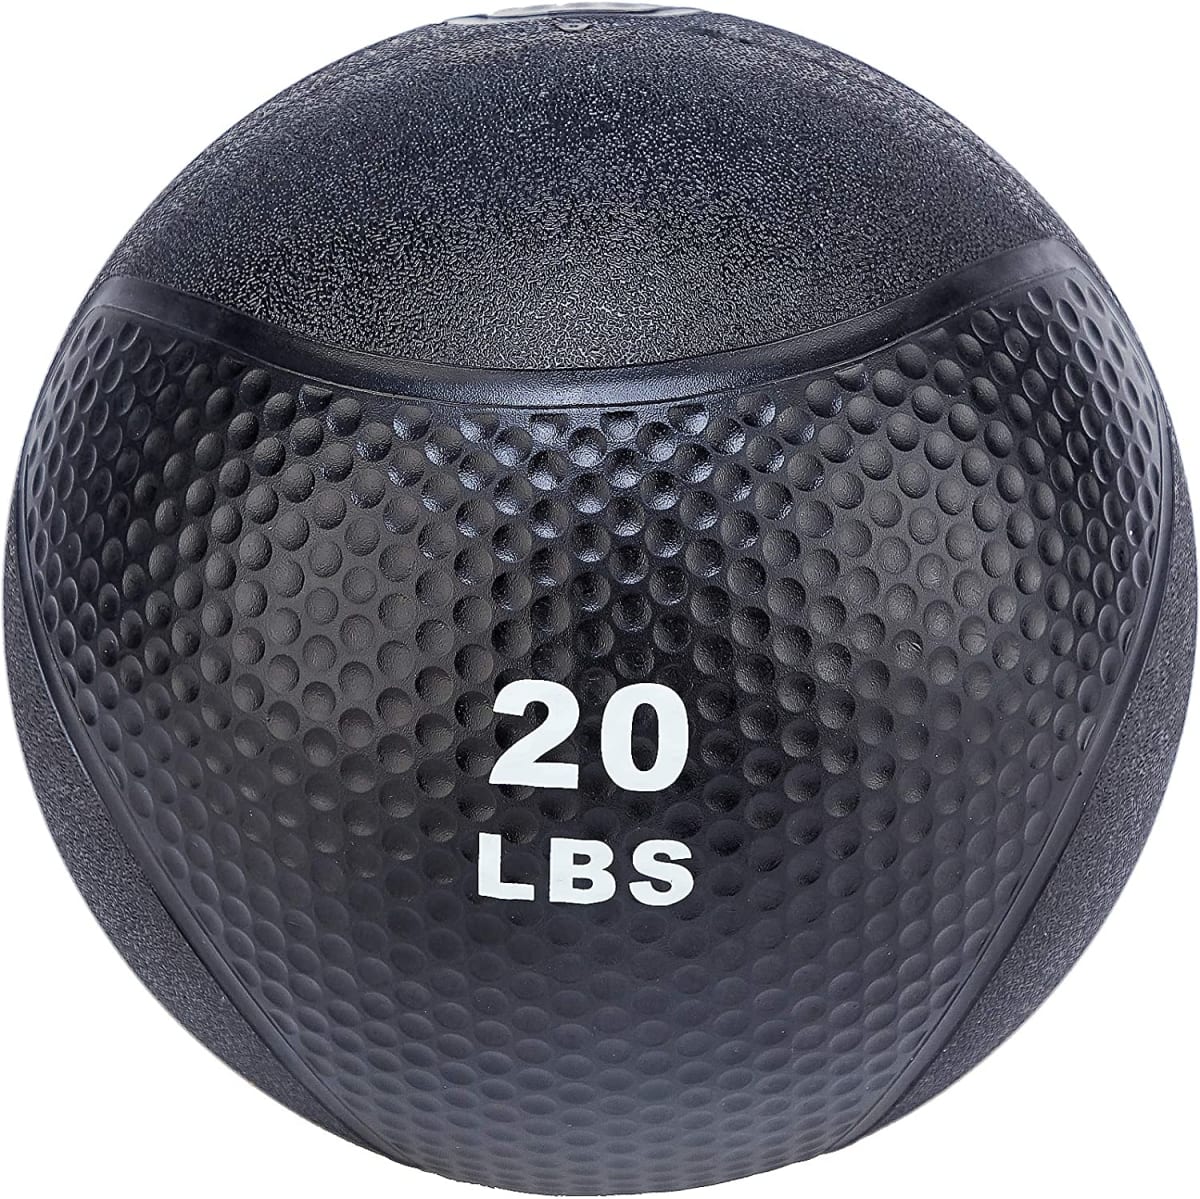 Workout Exercise Fitness Weighted Medicine Ball, Wall Ball and Slam Ball